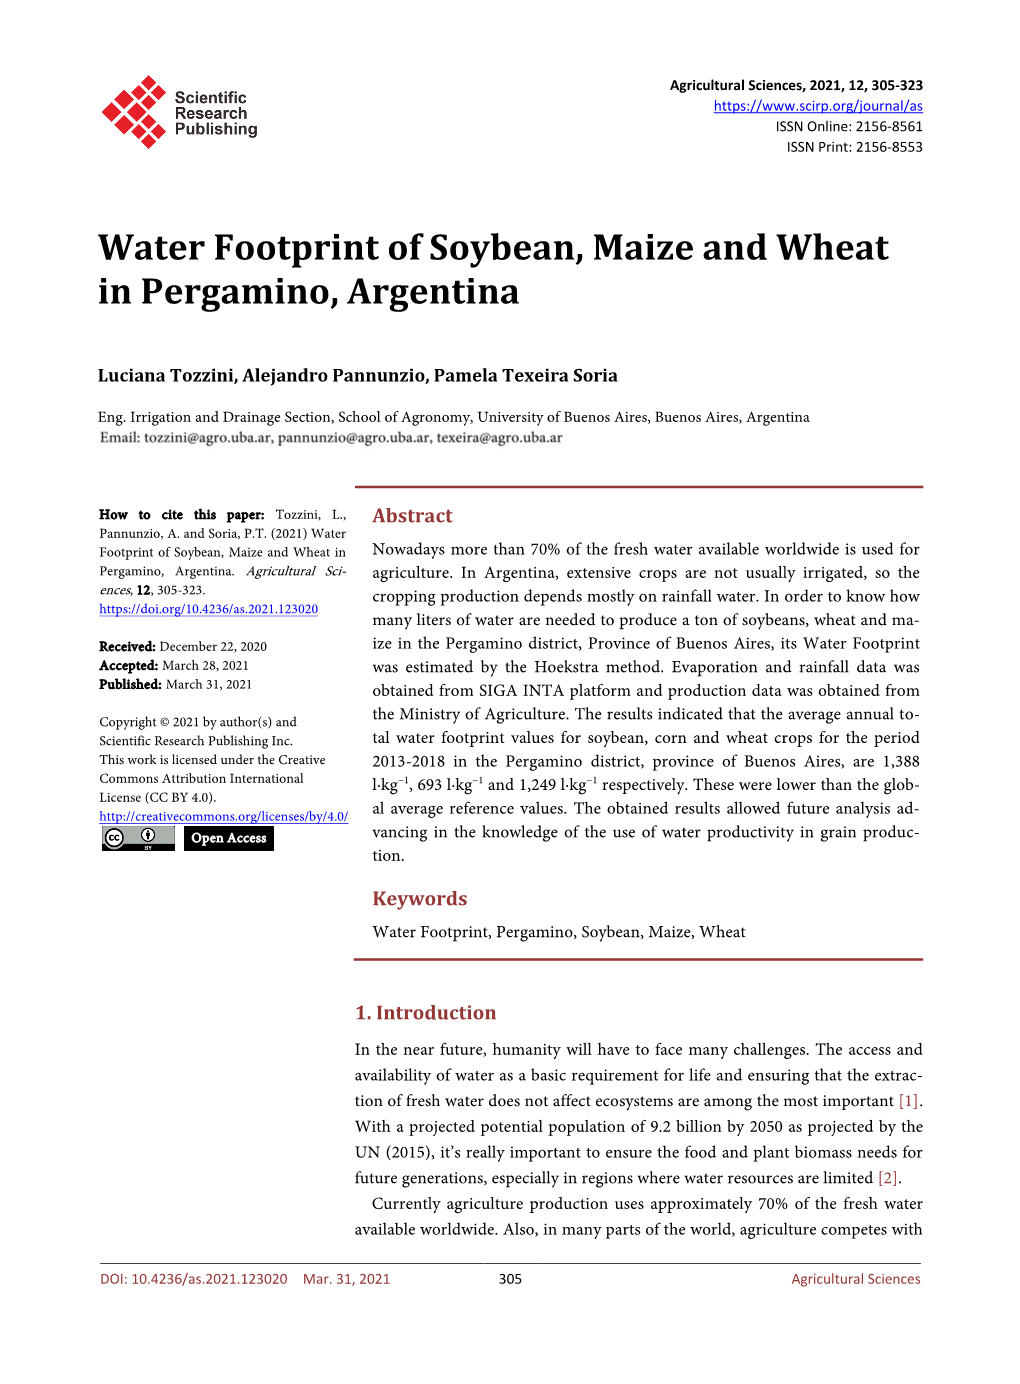 Water Footprint of Soybean, Maize and Wheat in Pergamino, Argentina